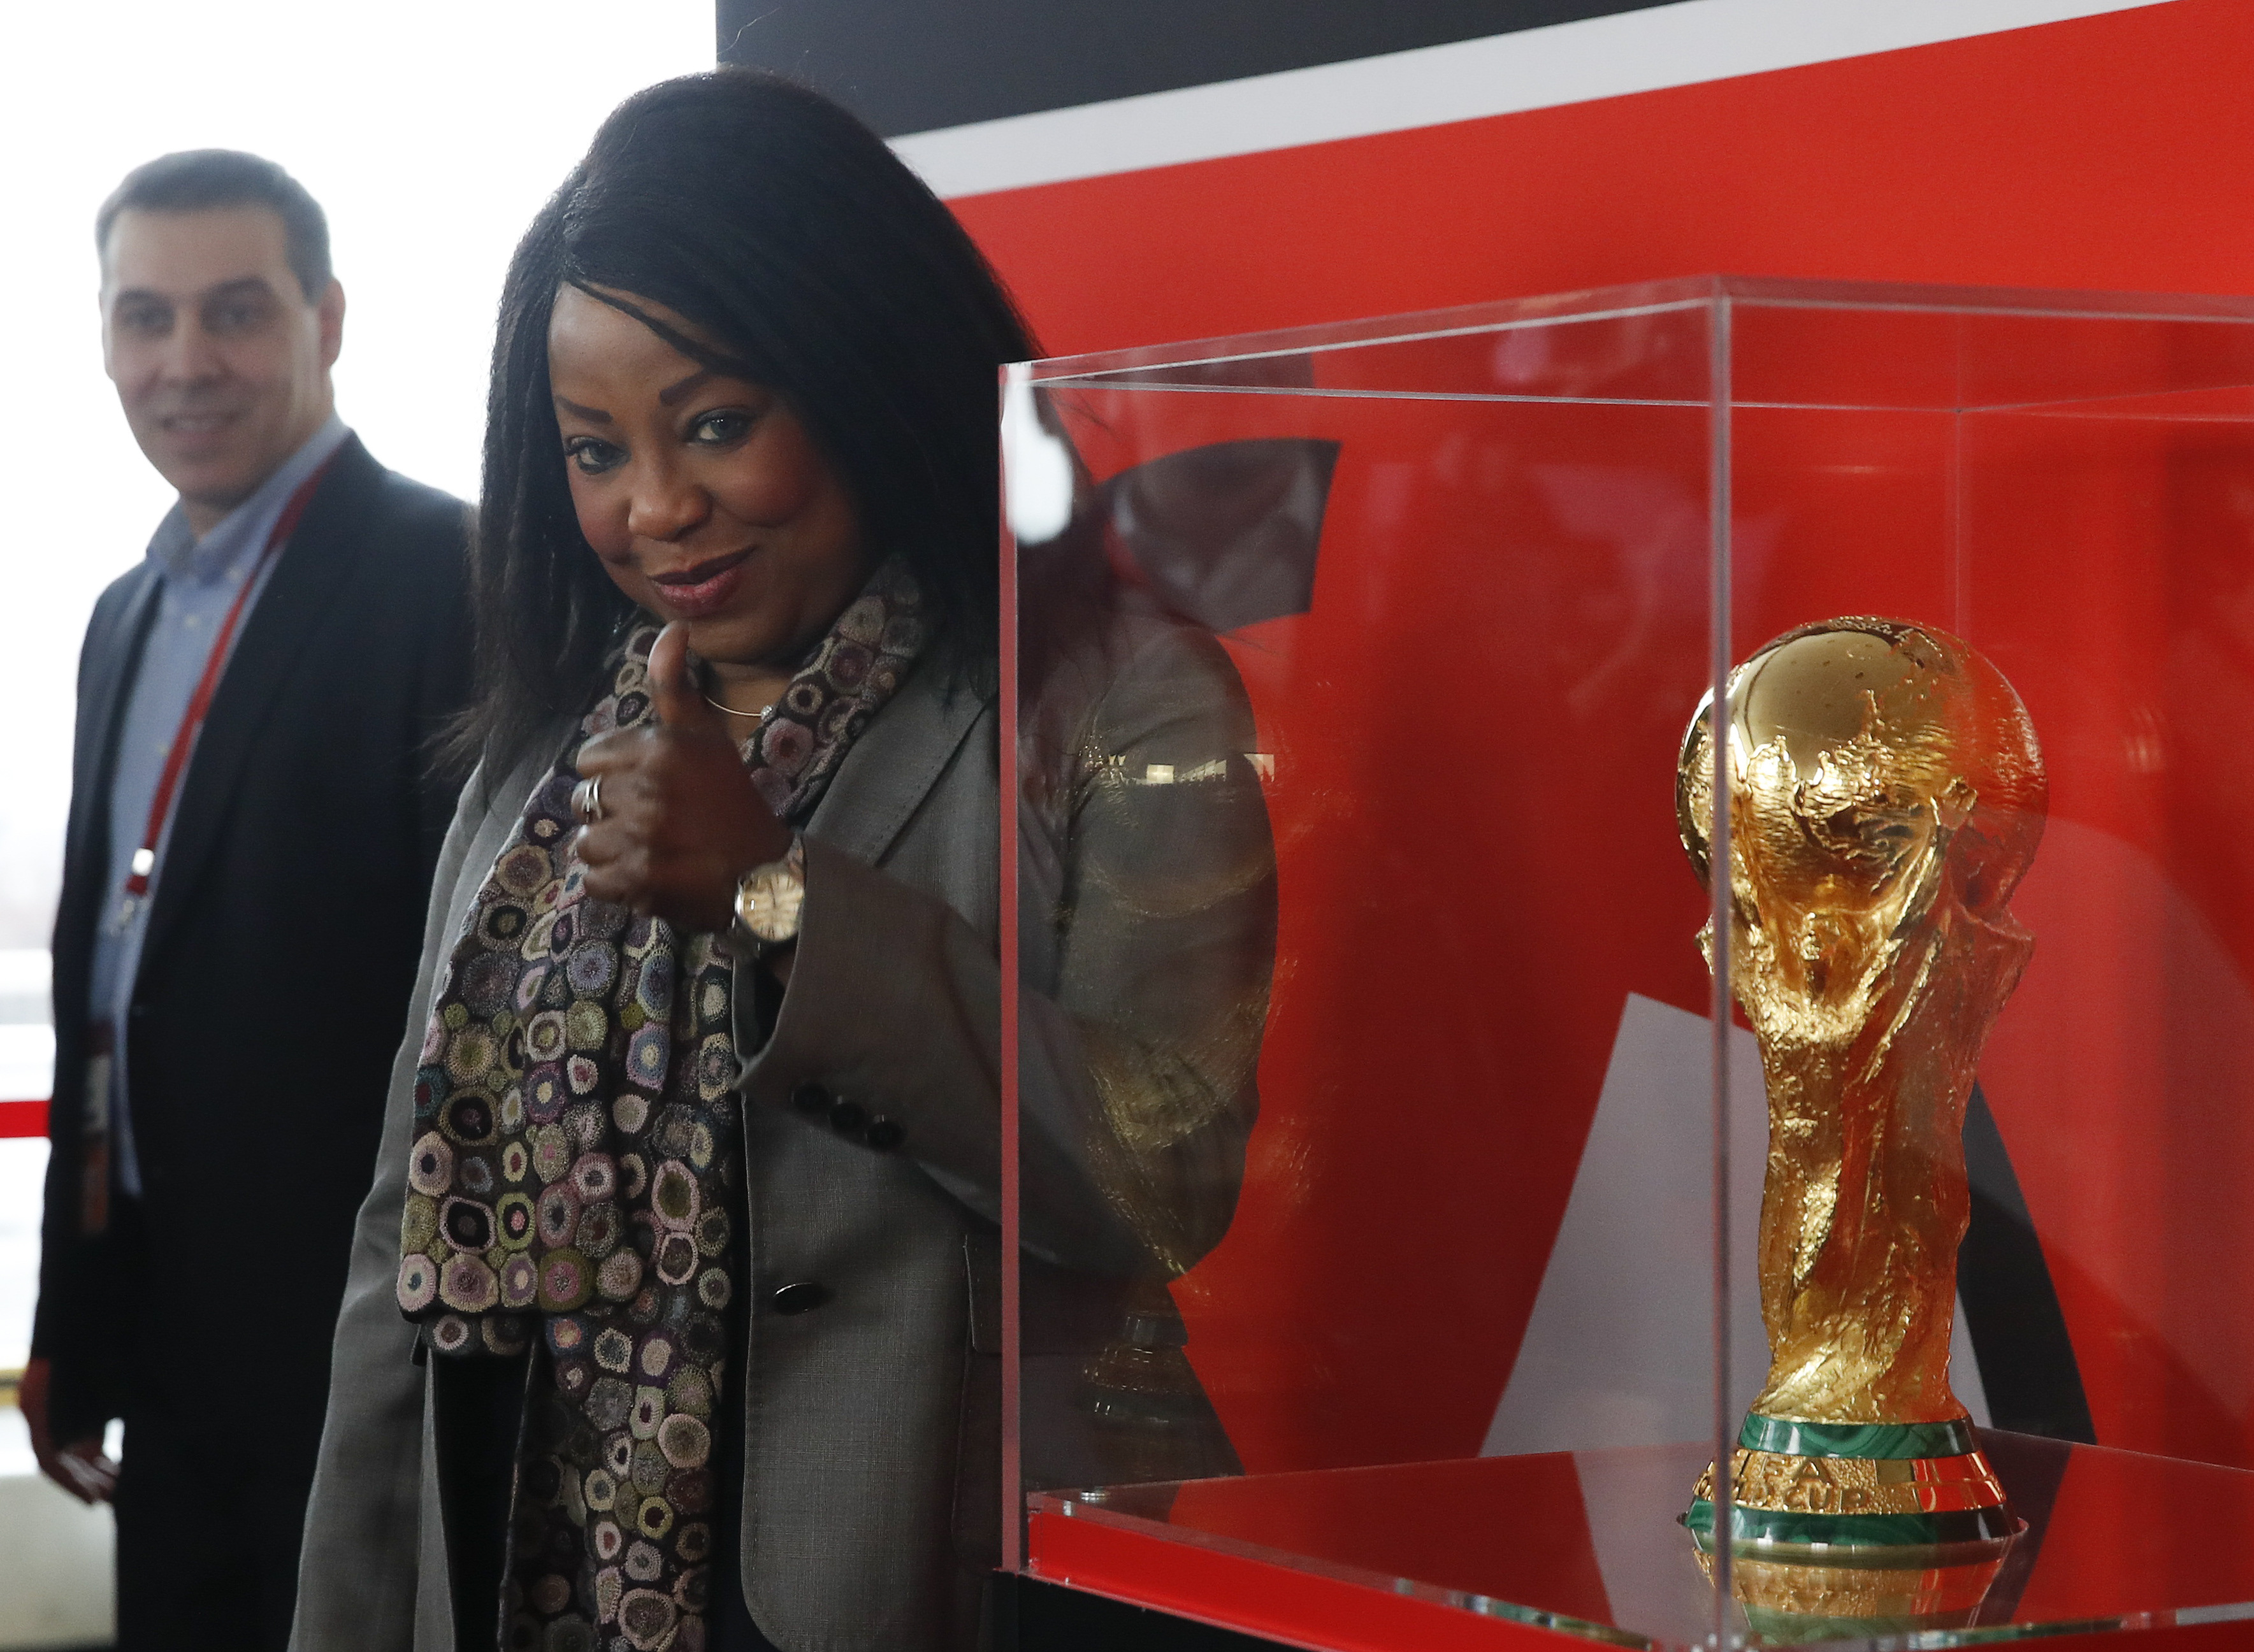 FIFA Secretary General Fatma Samoura gestures near the World Cup trophy during a demonstration in Moscow